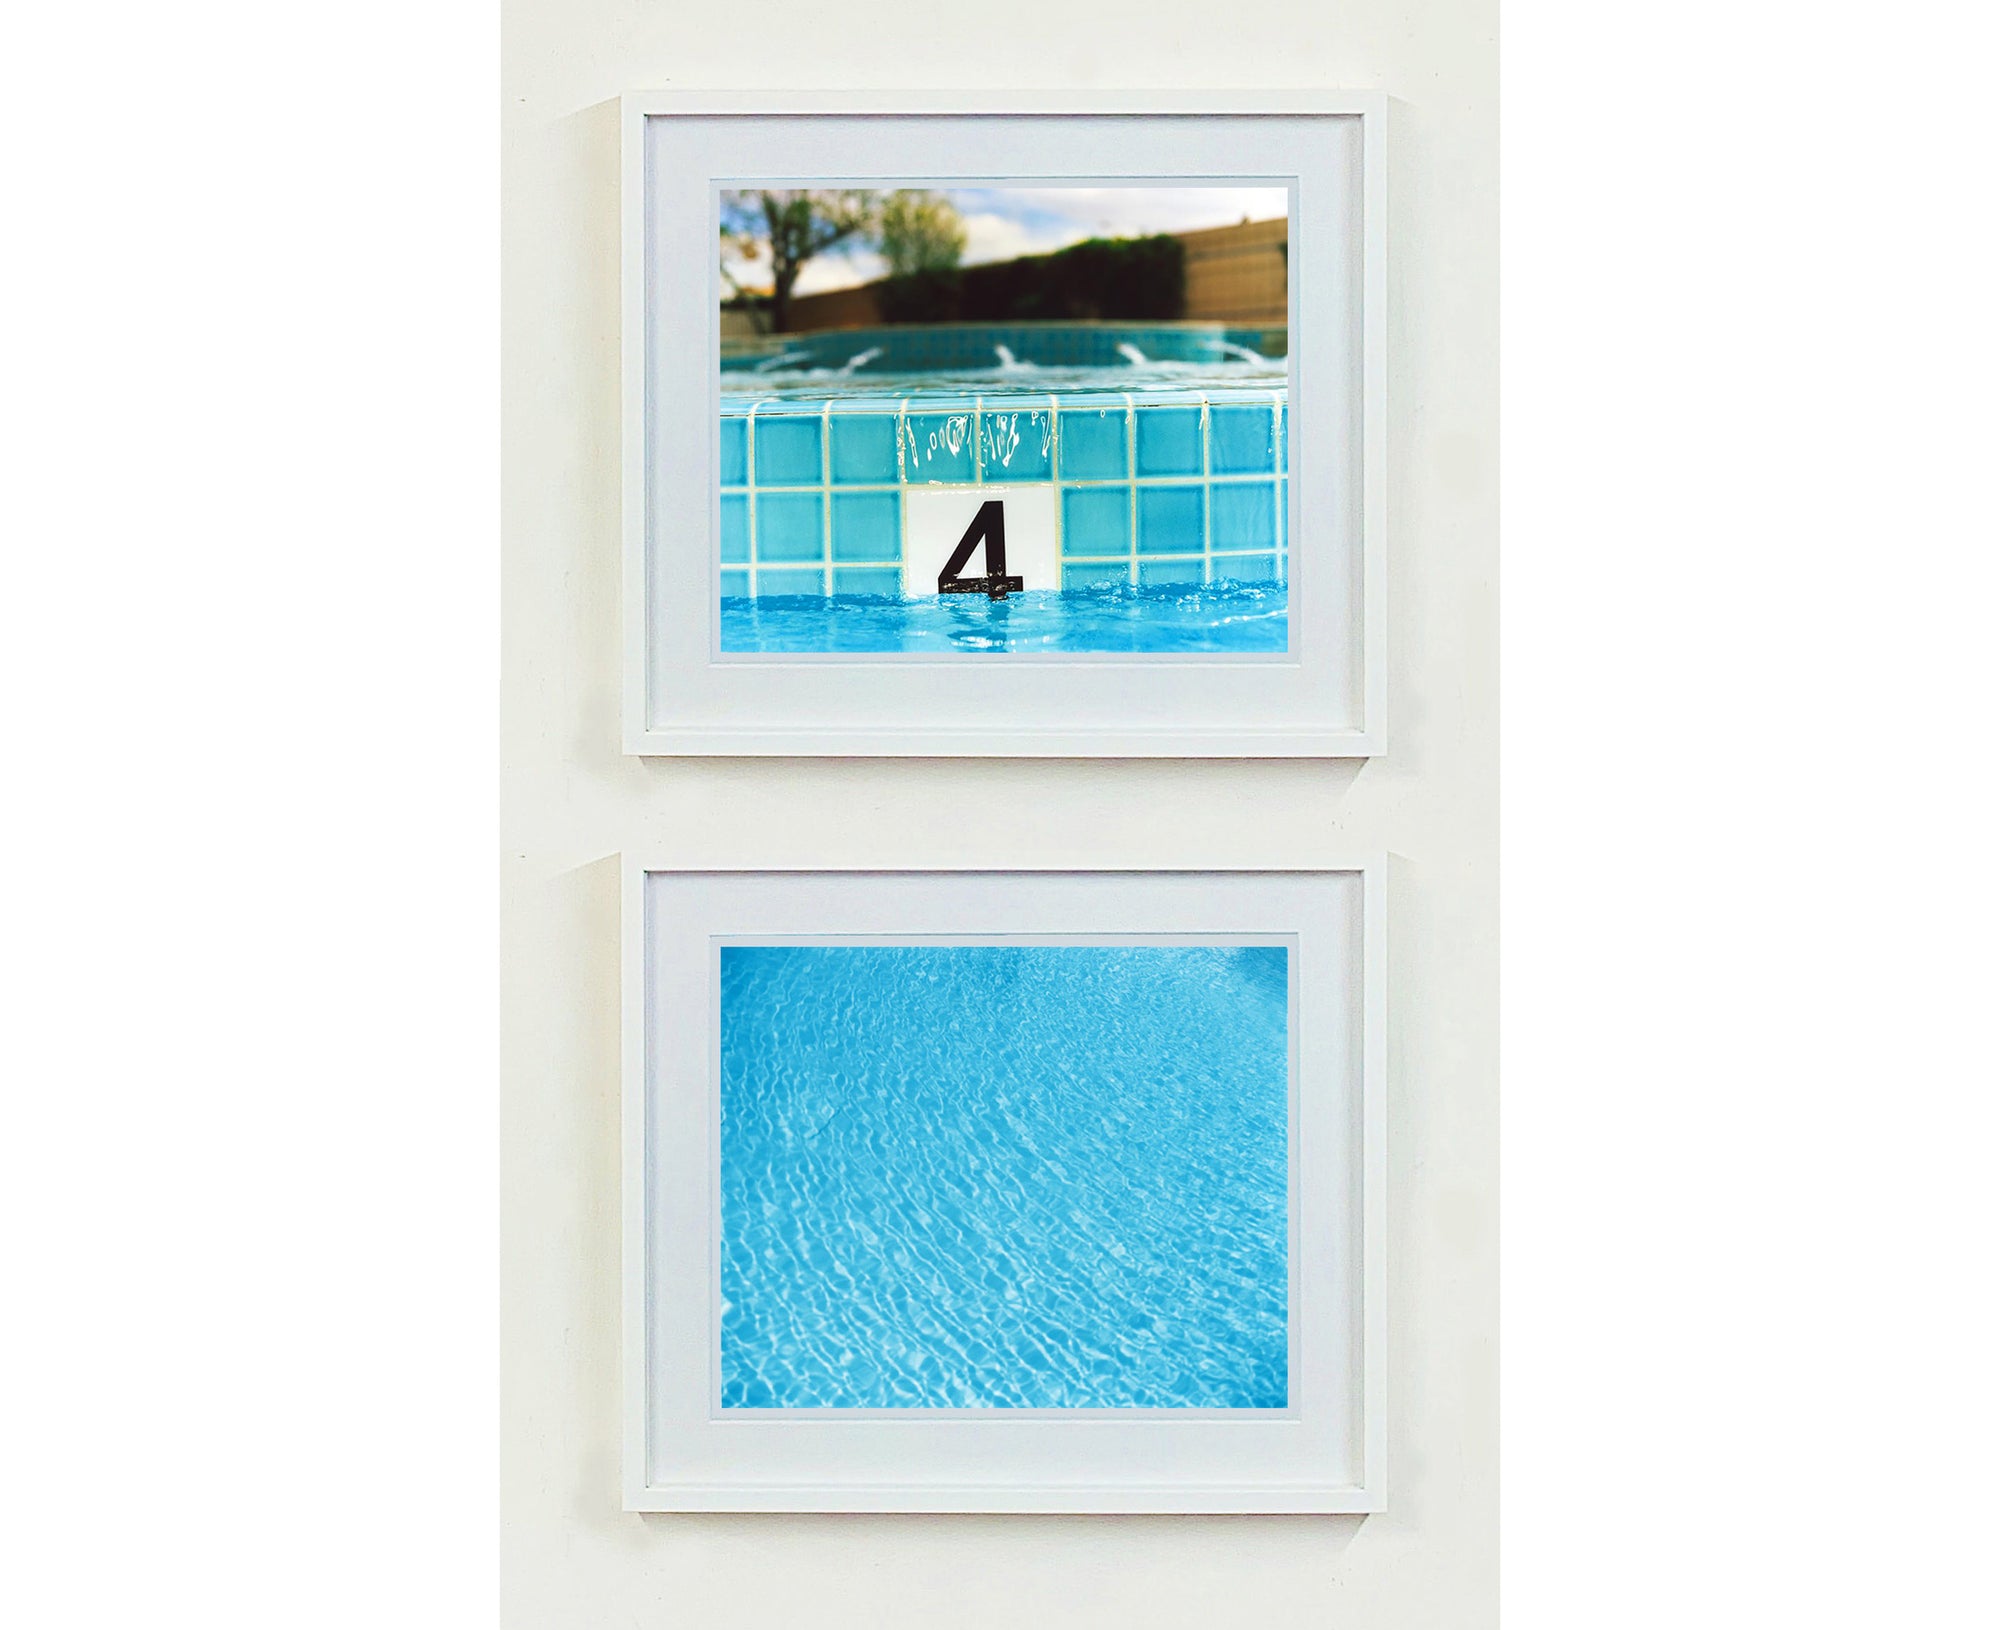 '4 Feet - El Morocco Pool' photographed in Las Vegas, Nevada is part of Richard Heeps' 'Dream in Colour' series. This enticing artwork will bring cool summer vibes to your home every day of the year. 